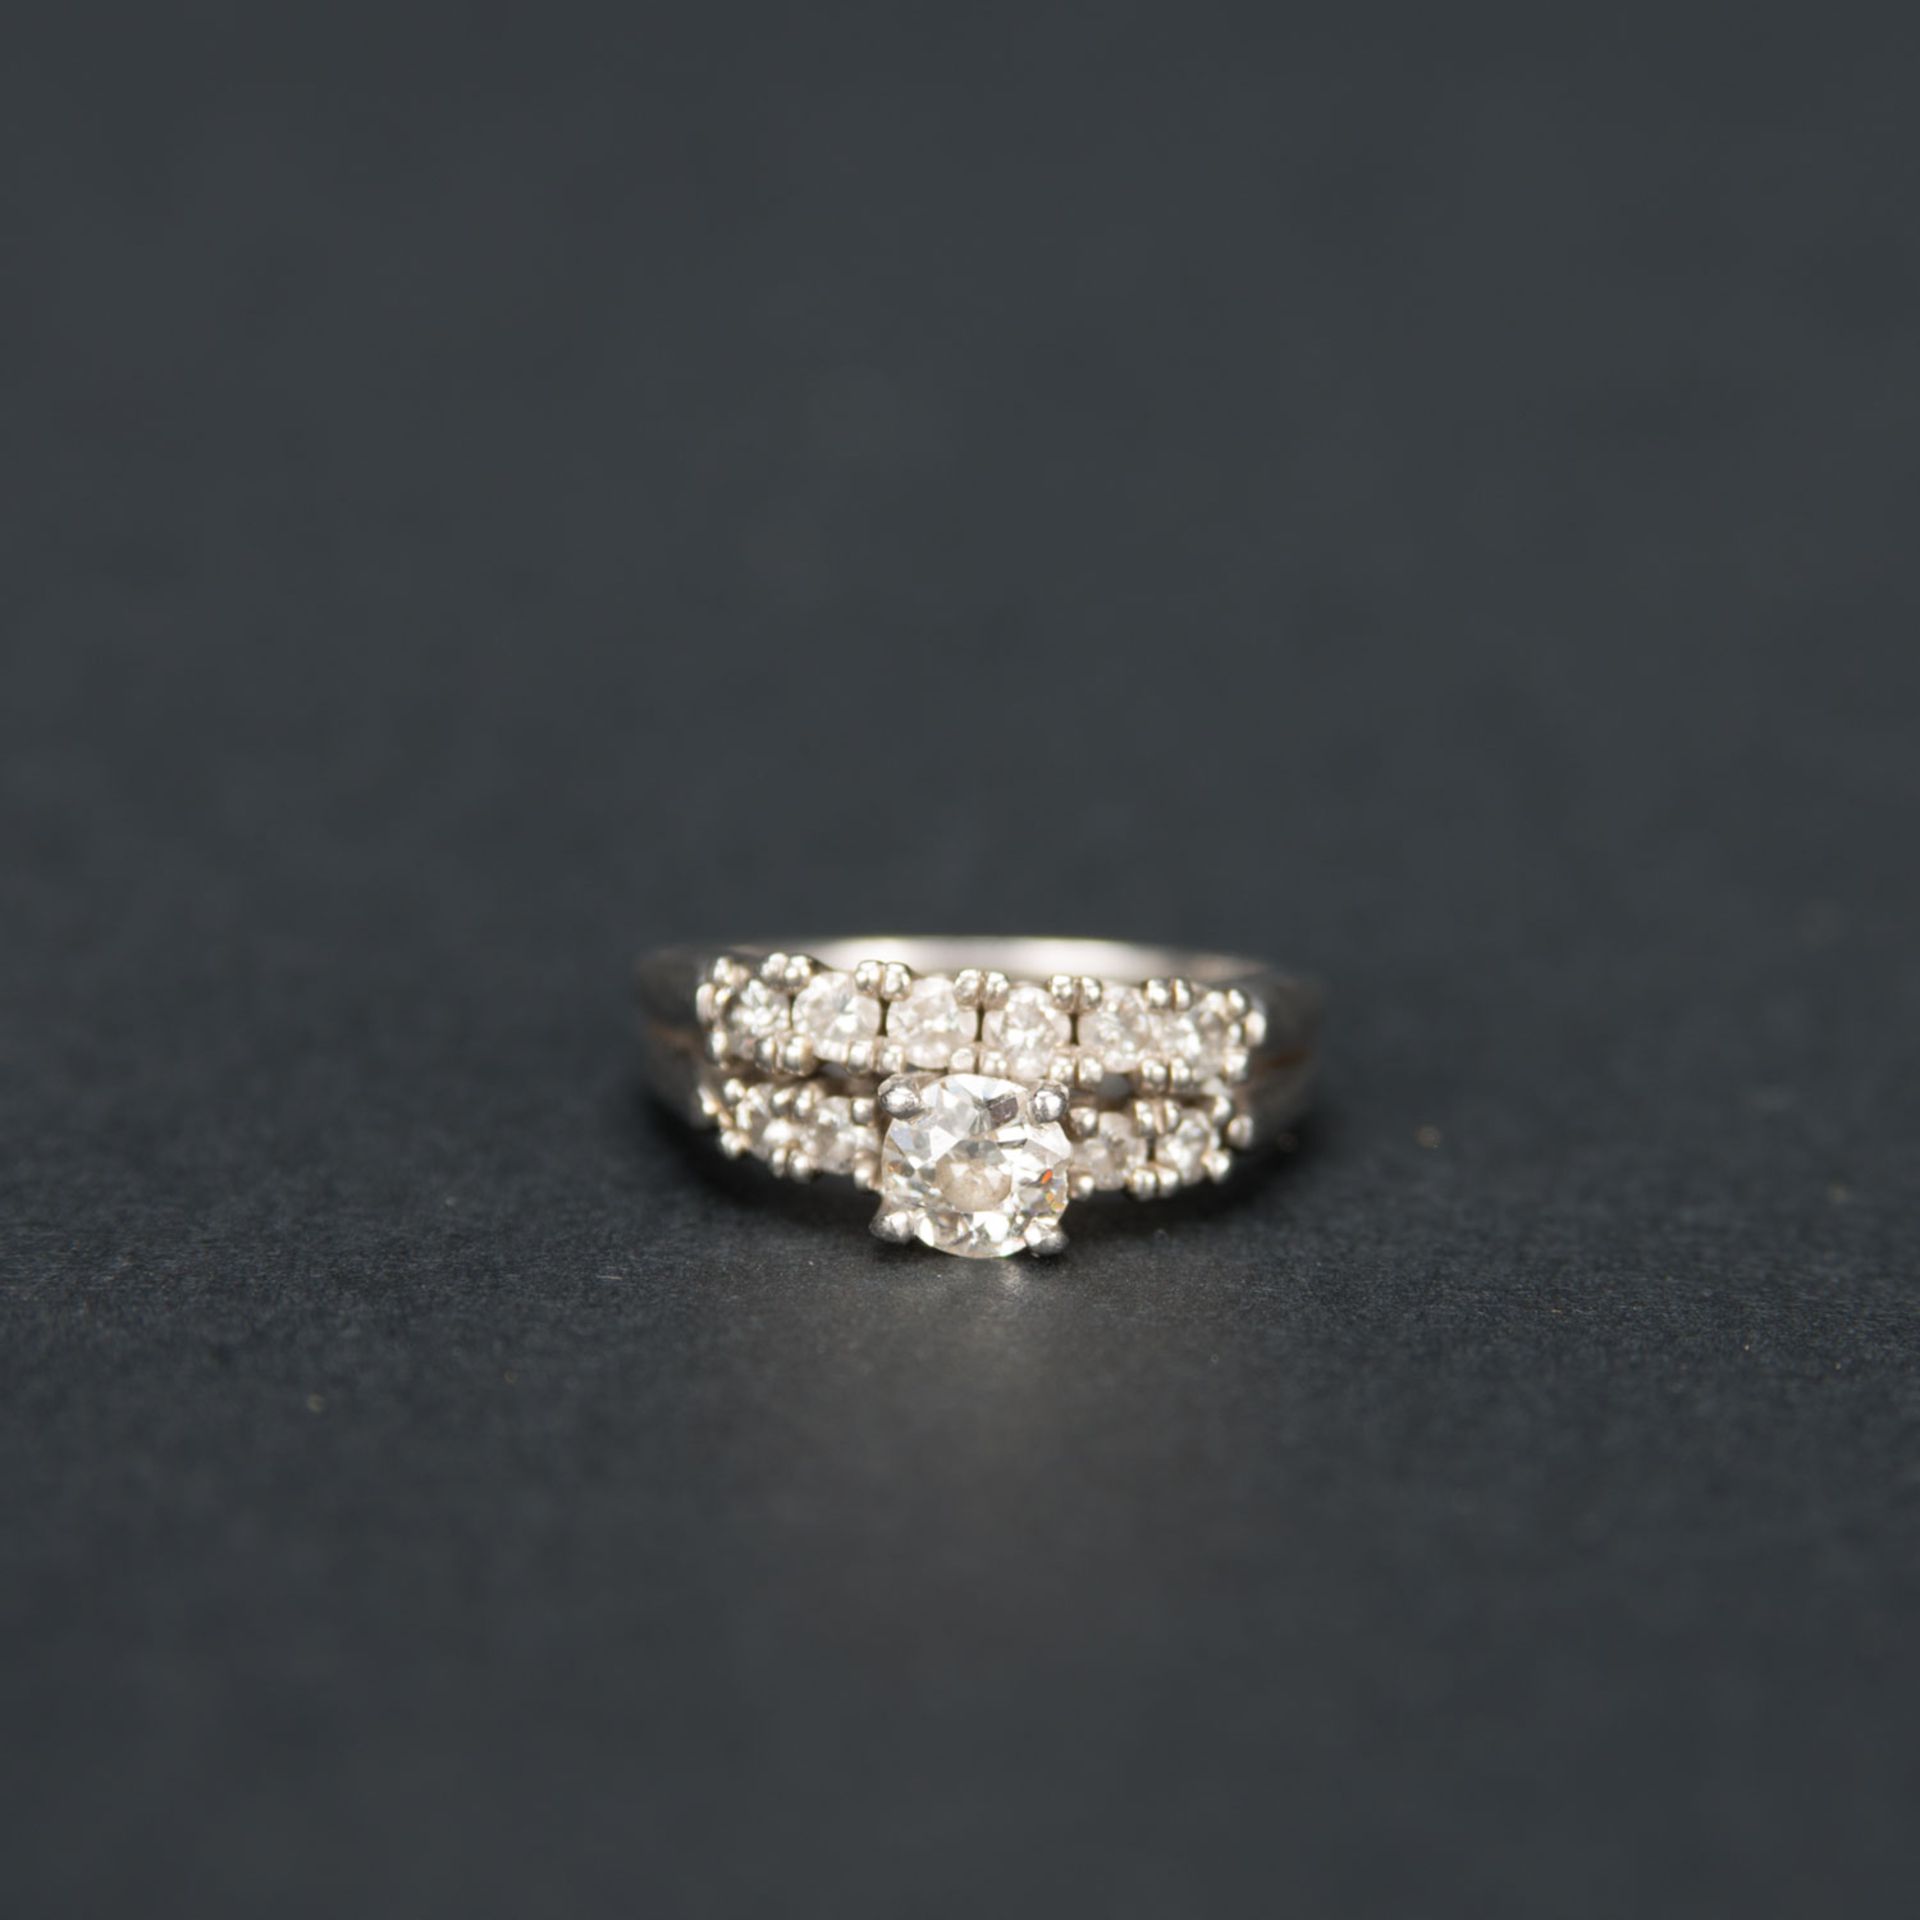 Ladys Ring with Diamonds - Image 2 of 3